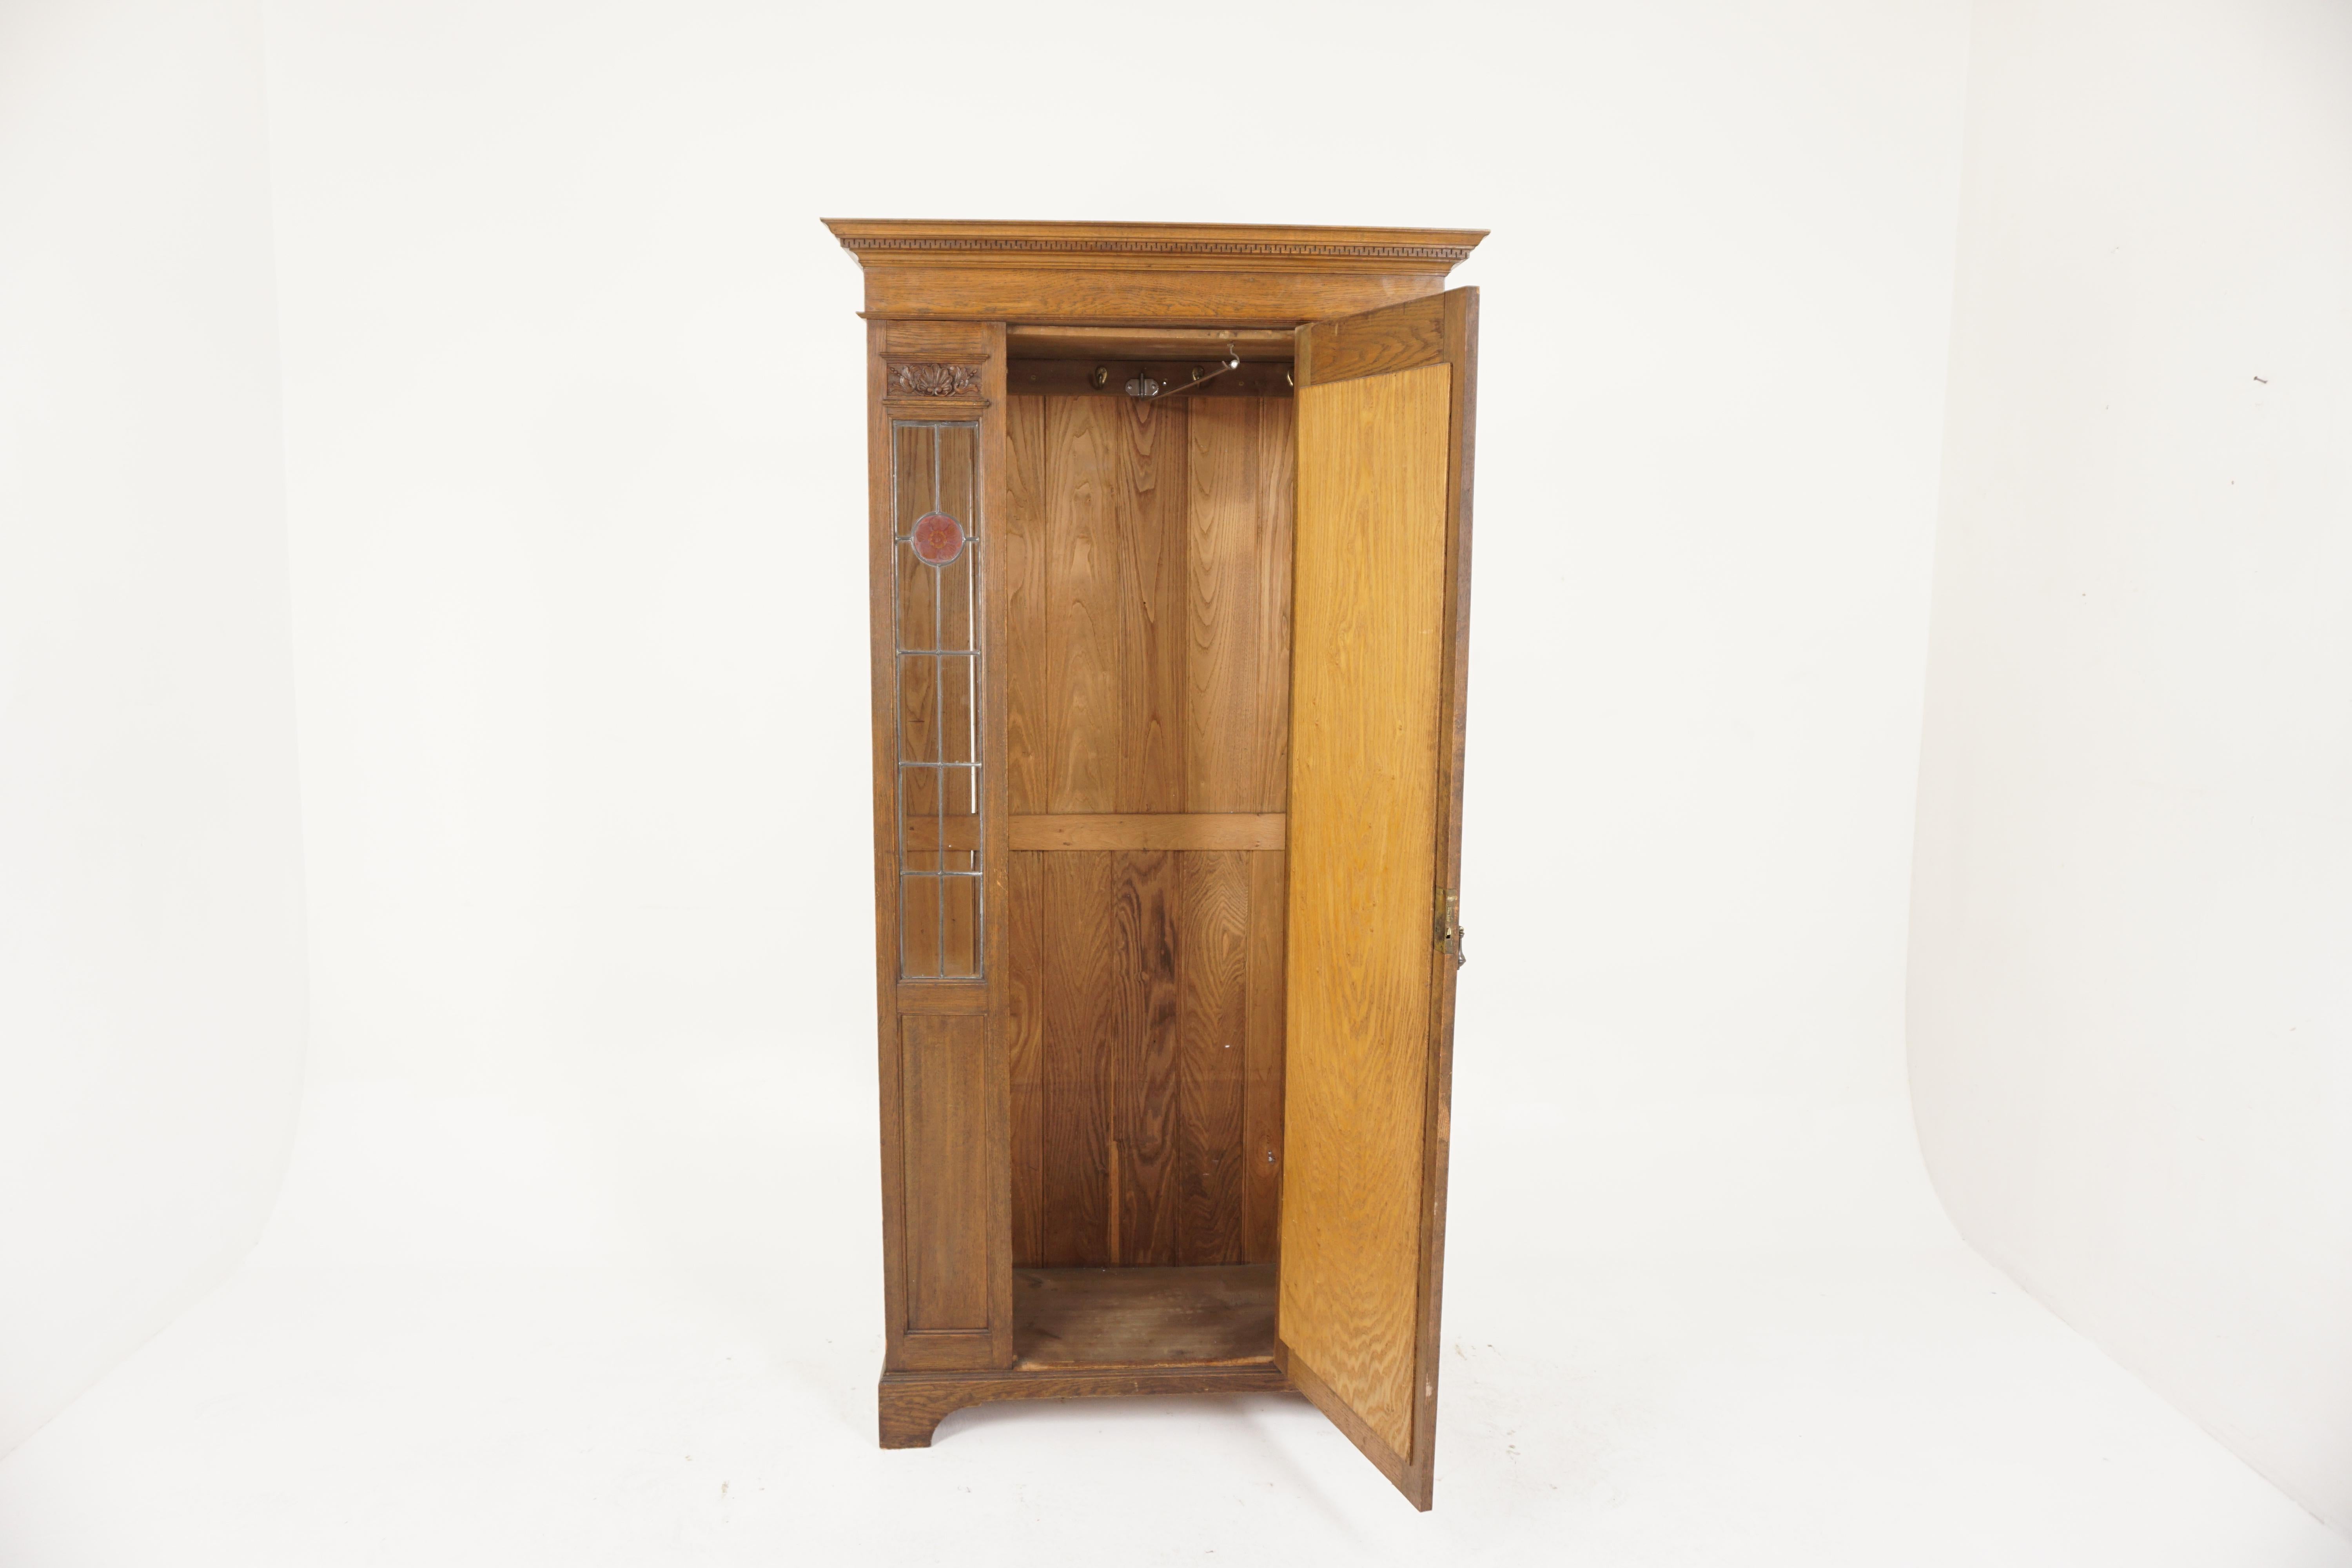 Antique Oak Arts and Craft mirror back hall armoire, wardrobe, closet, leaded glass, Scotland 1910, H247

Scotland 1910
Solid Oak
Original Finish
Dentil Cornice on top with single oval bevelled mirror on door
Flanked by a pair of leaded glass